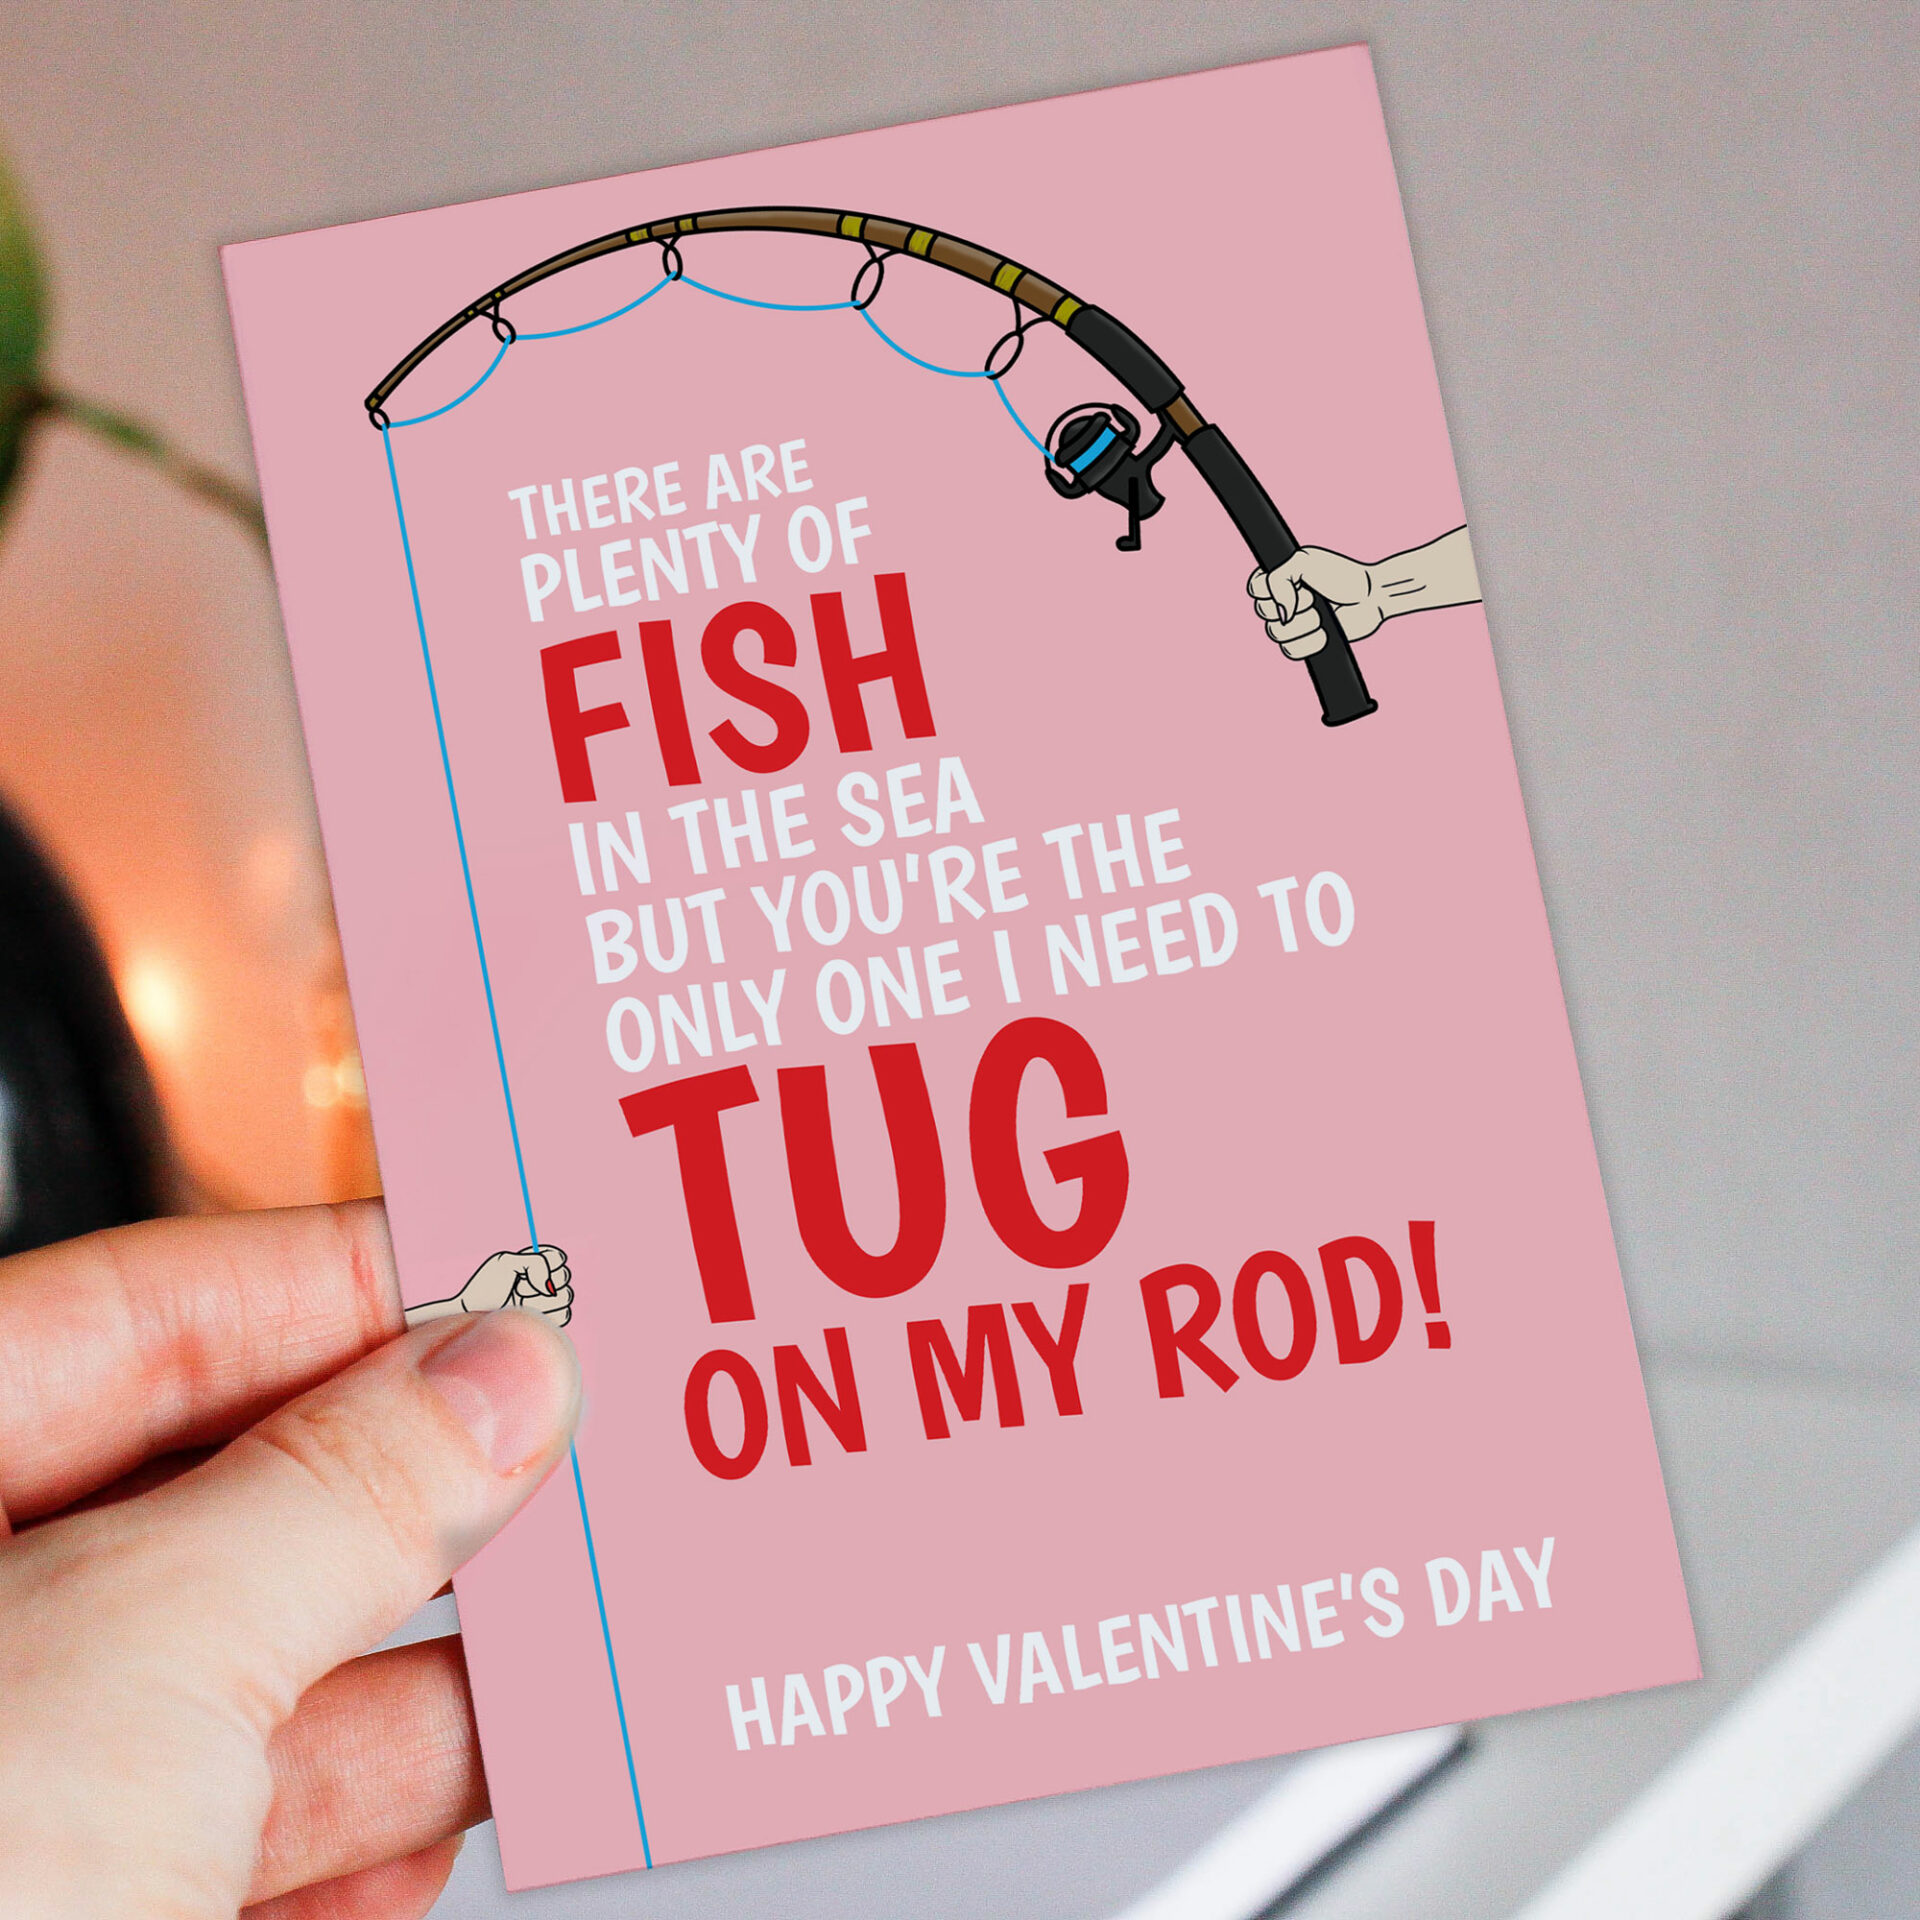 Tindagat - Fishing you all a Happy Valentine's Day